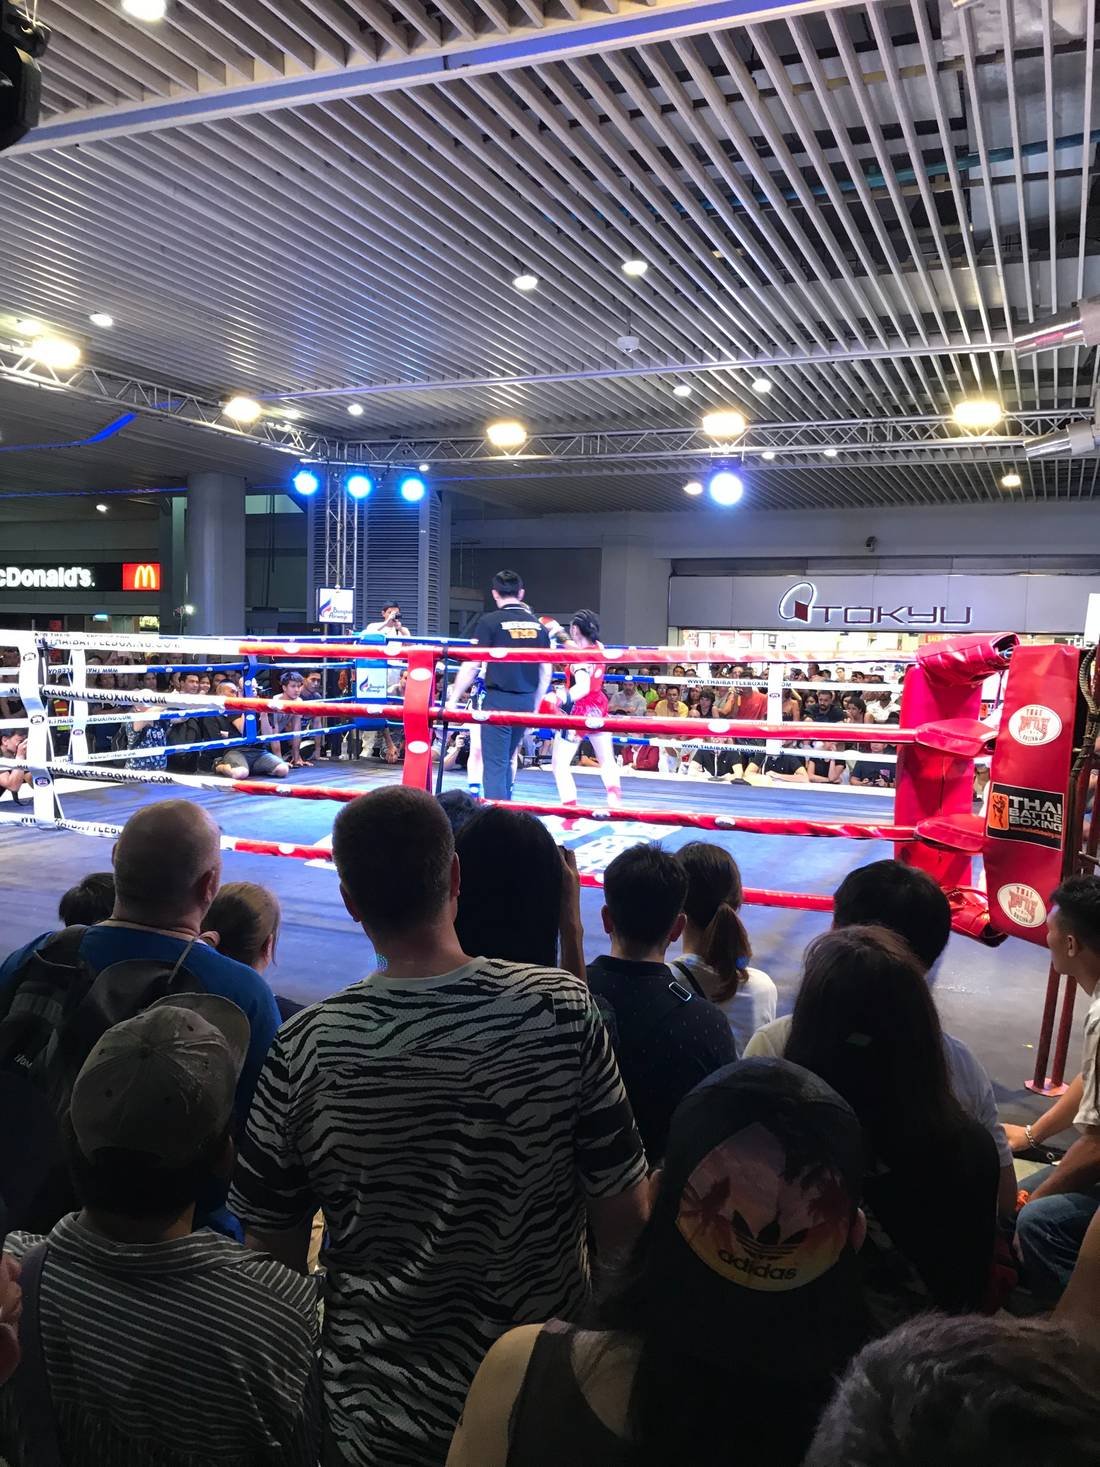 They have weekly free Muay-Thai fights near MBK Mall.